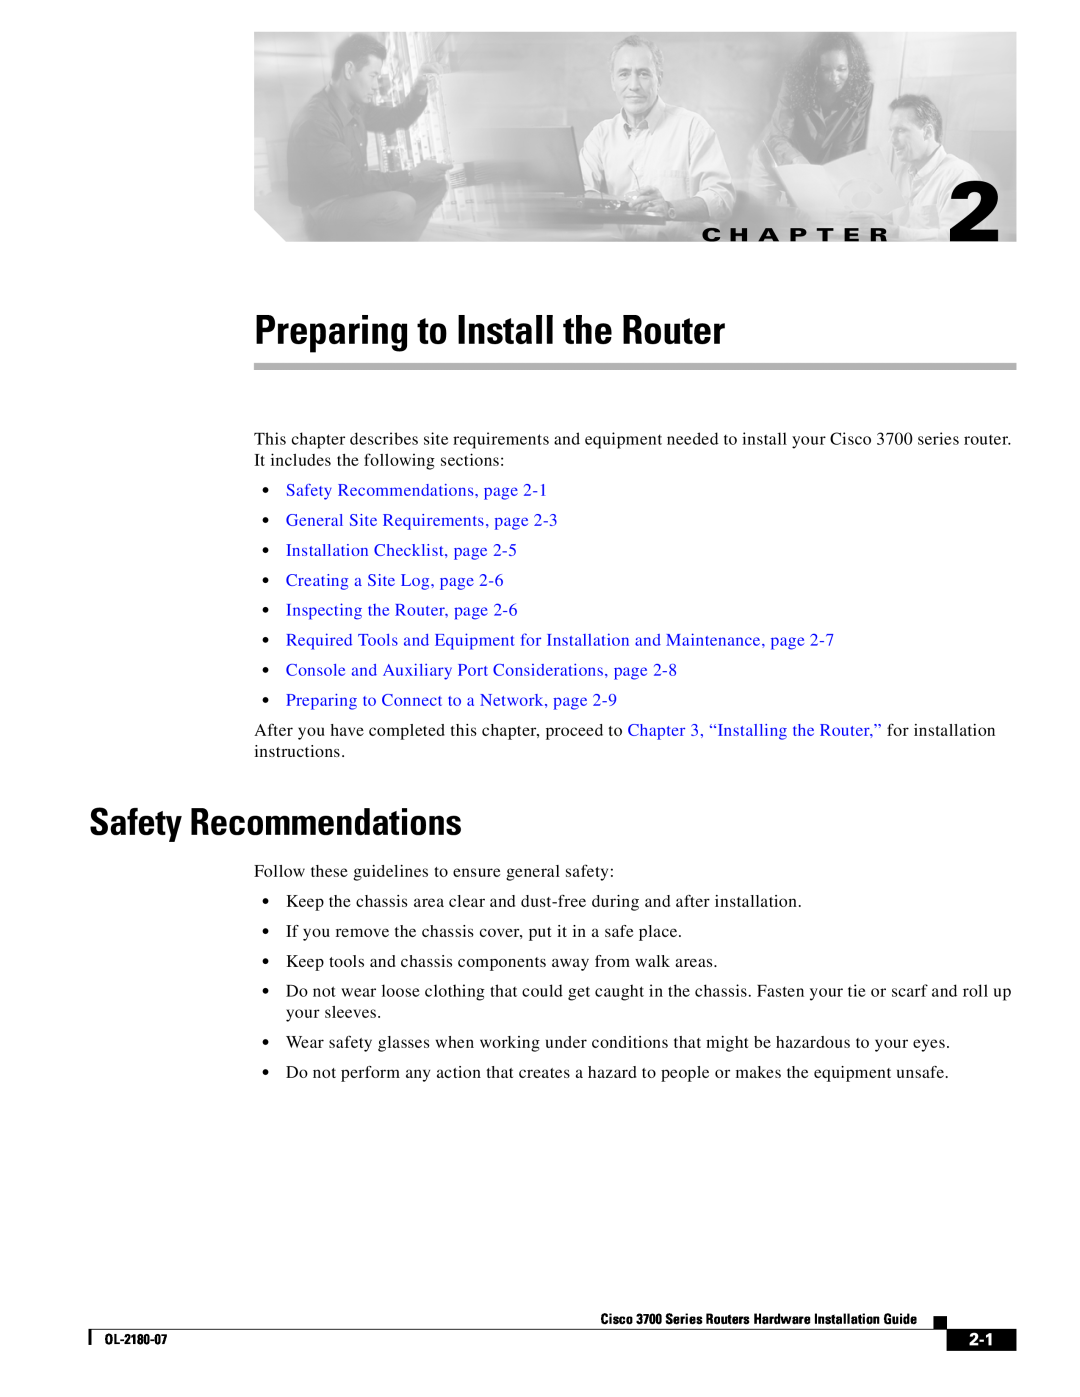 Cisco Systems 3700 Series manual Preparing to Install the Router, Safety Recommendations, Inspecting the Router, page 